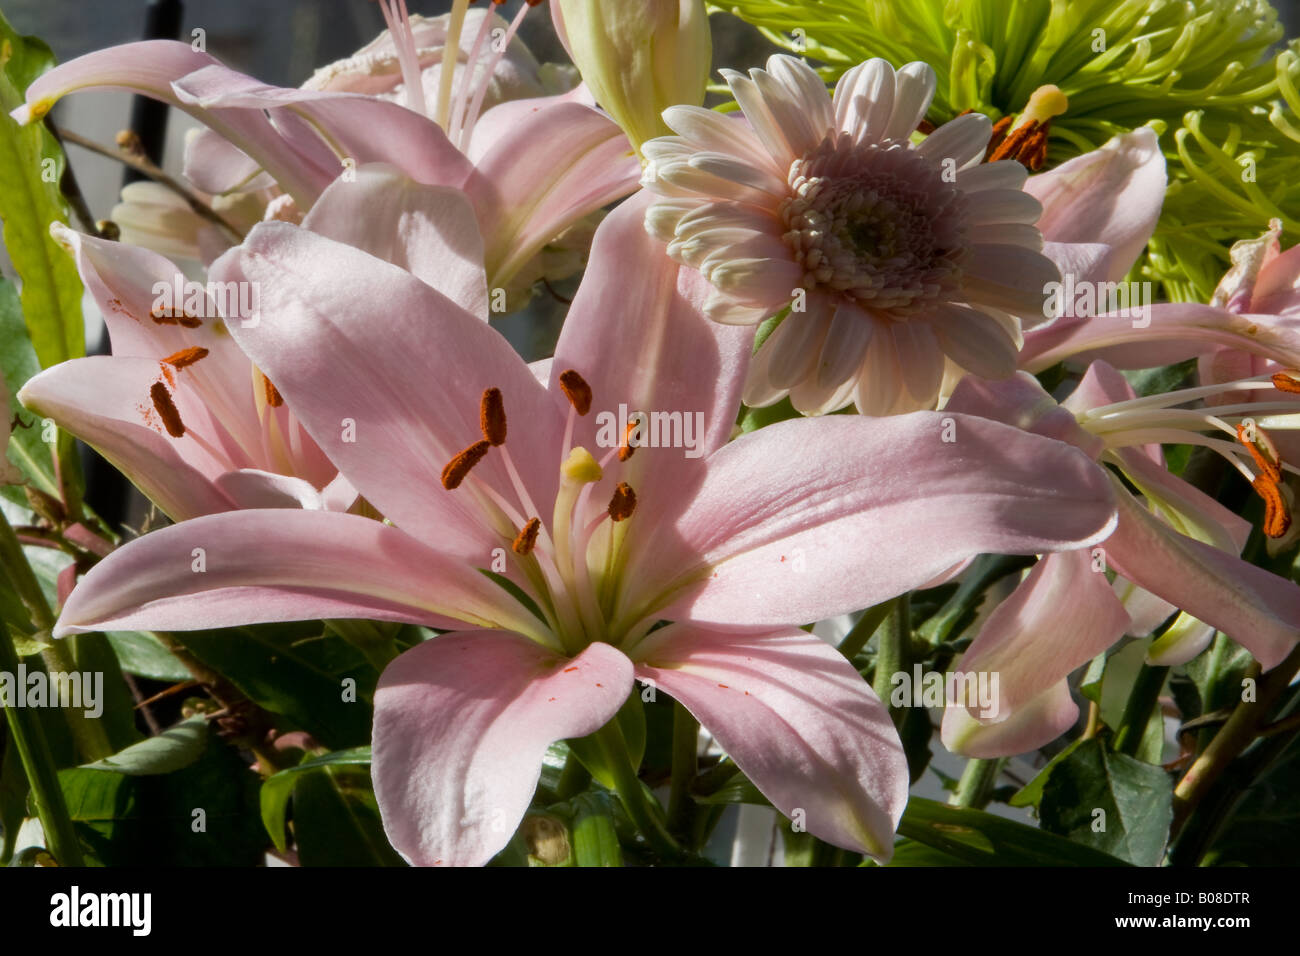 Close up view of some very bright and beautiful flowers Stock Photo